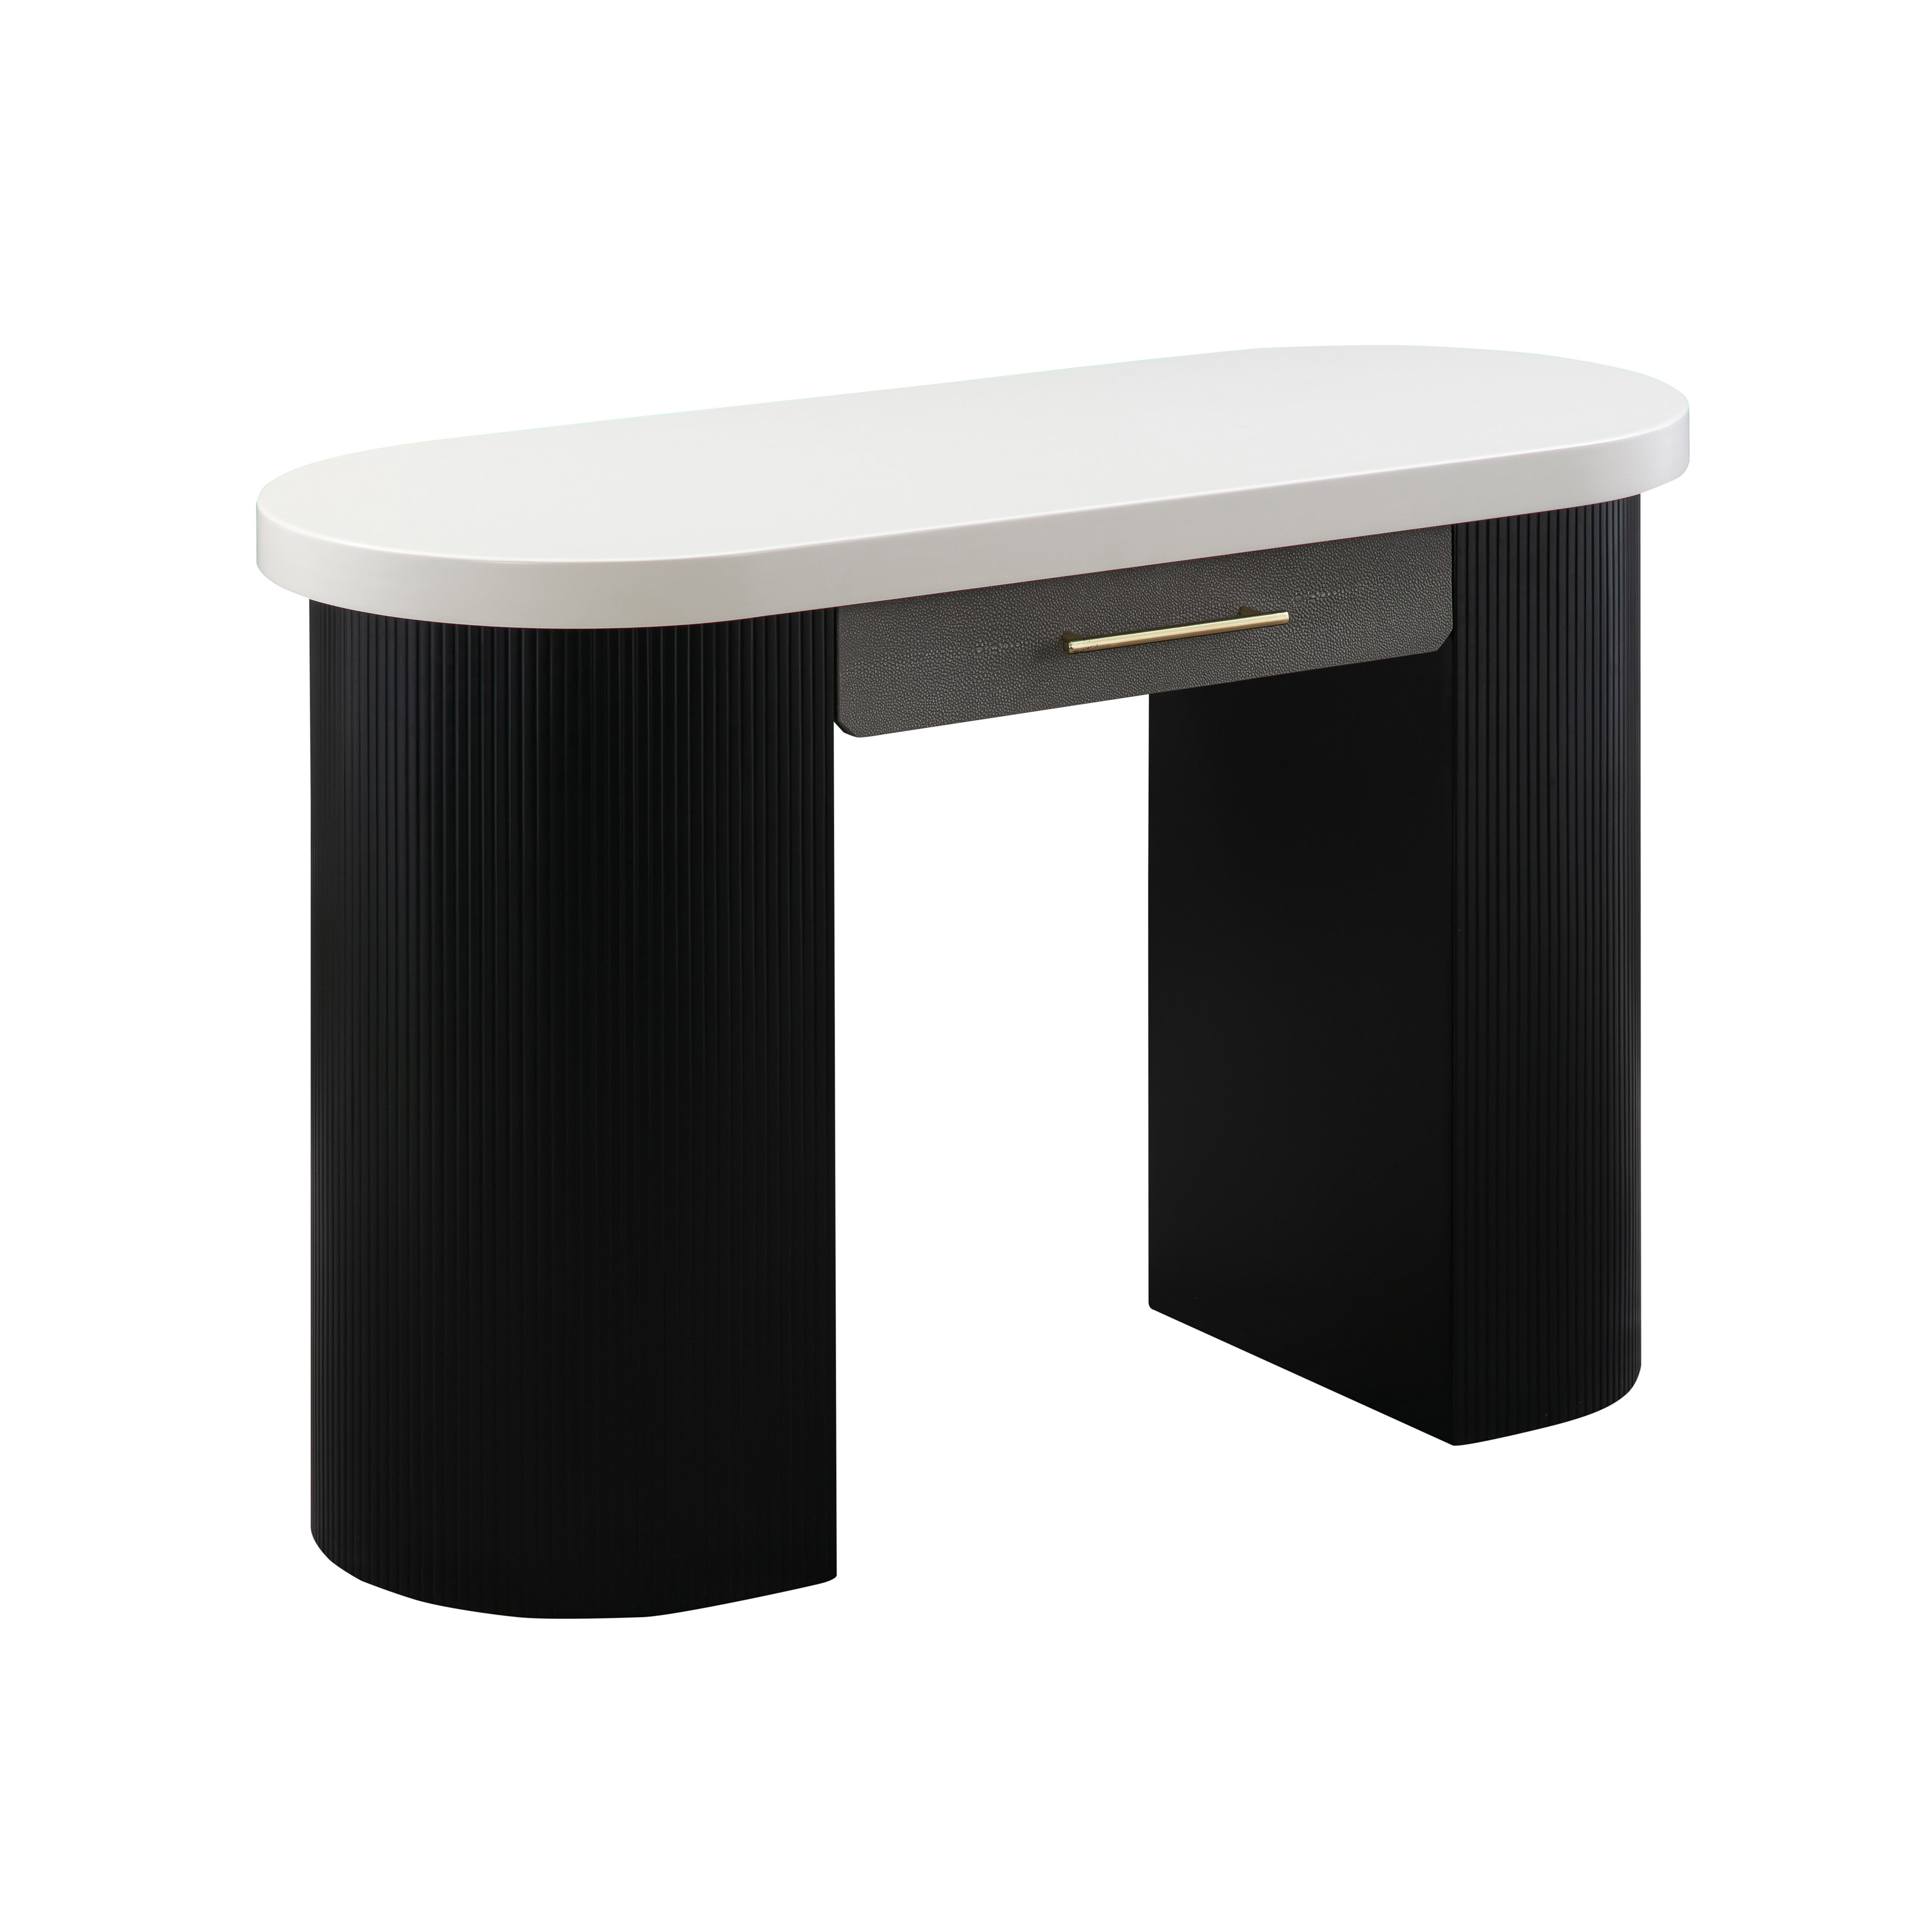 image of Makai Cream and Charcoal Desk/Console with sku:TOV-VH44178